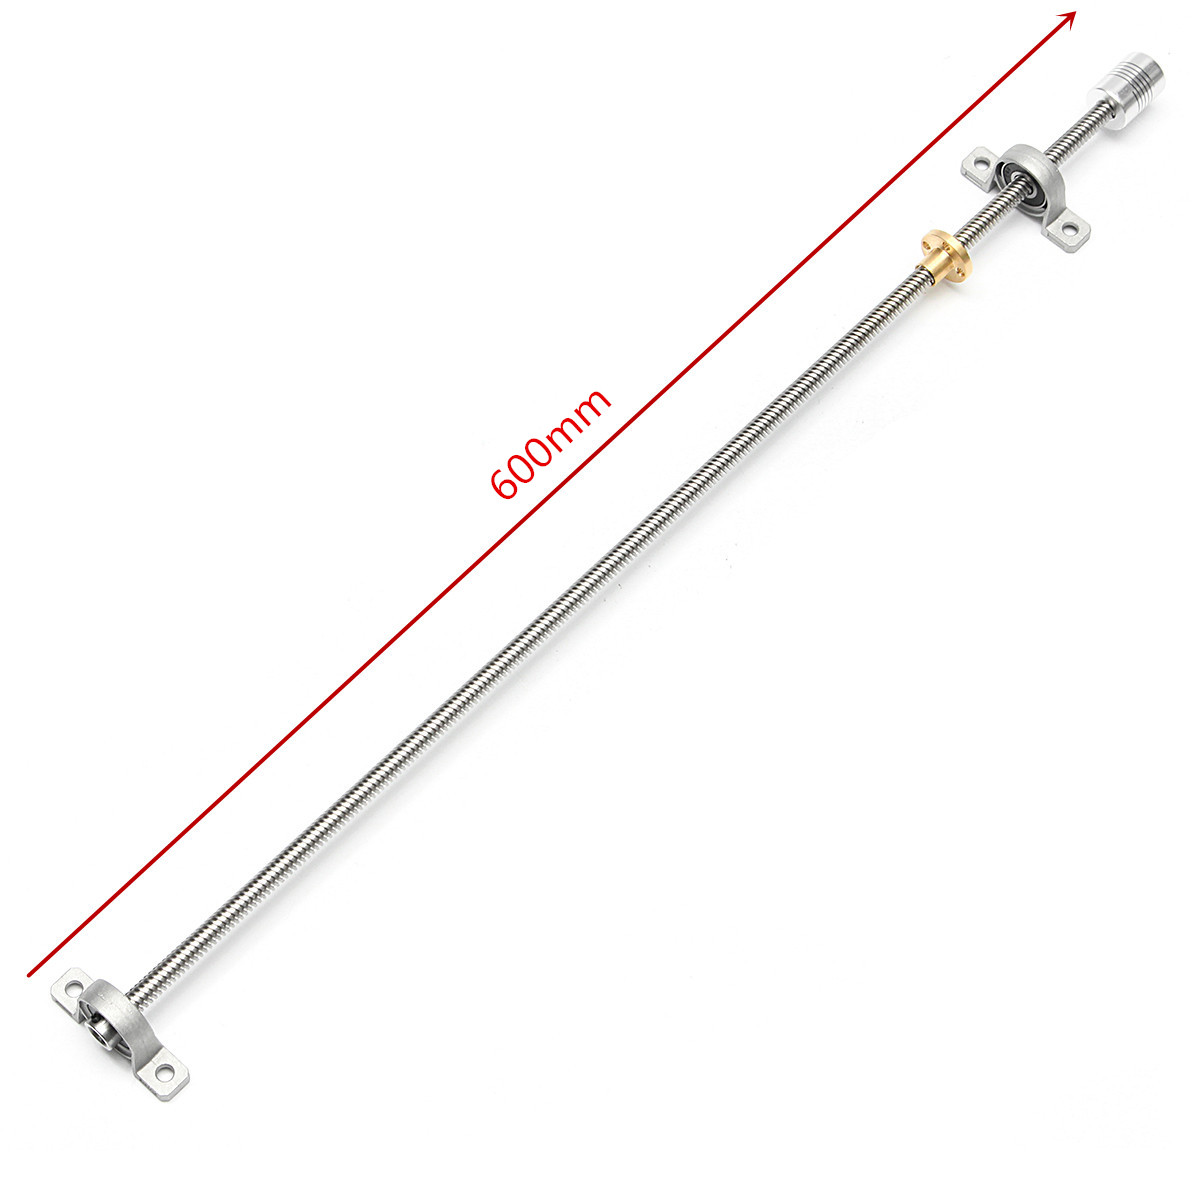 T8 600mm Stainless Steel Lead Screw Coupling Shaft Mounting + Motor For 3D Printer 14